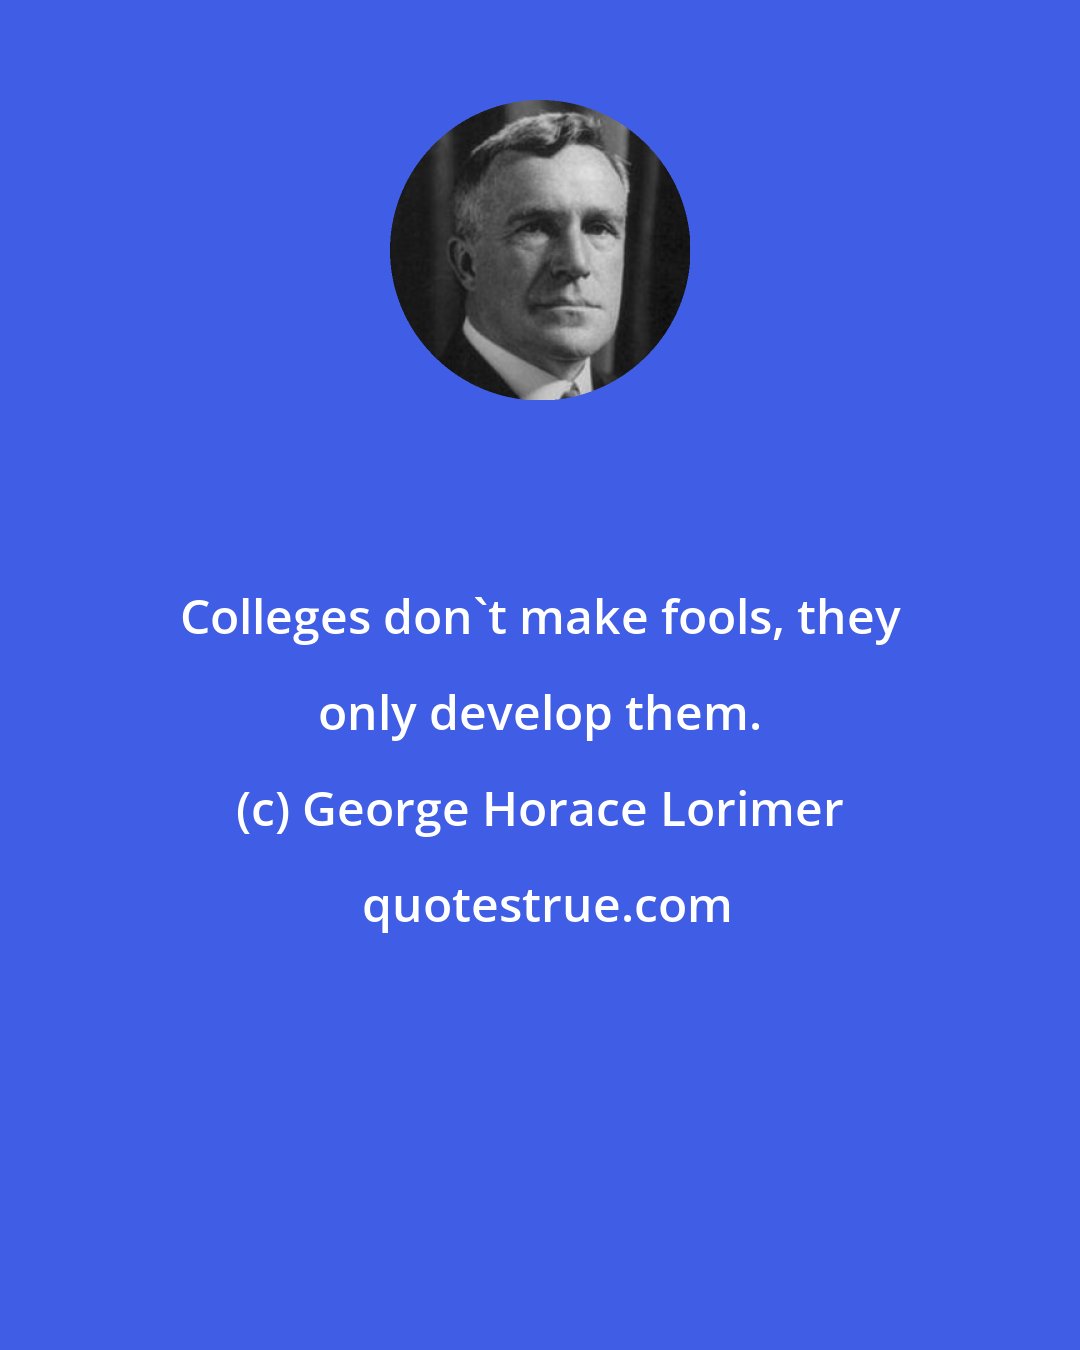 George Horace Lorimer: Colleges don't make fools, they only develop them.